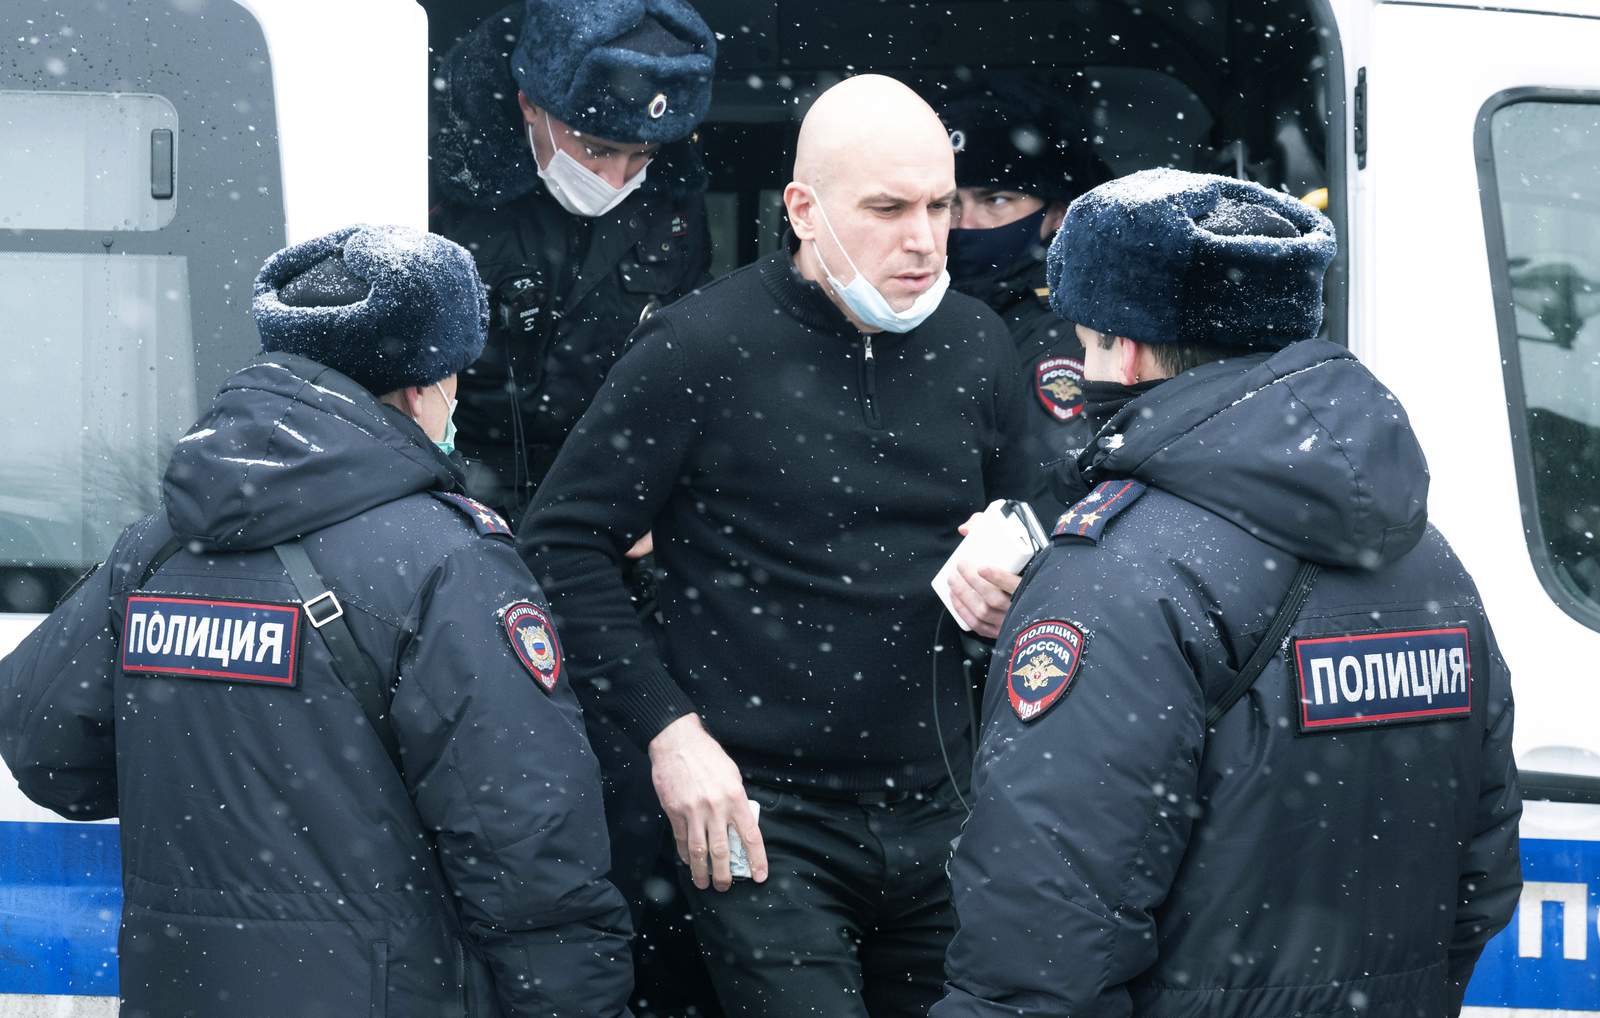 Police detain participants in Russian opposition forum